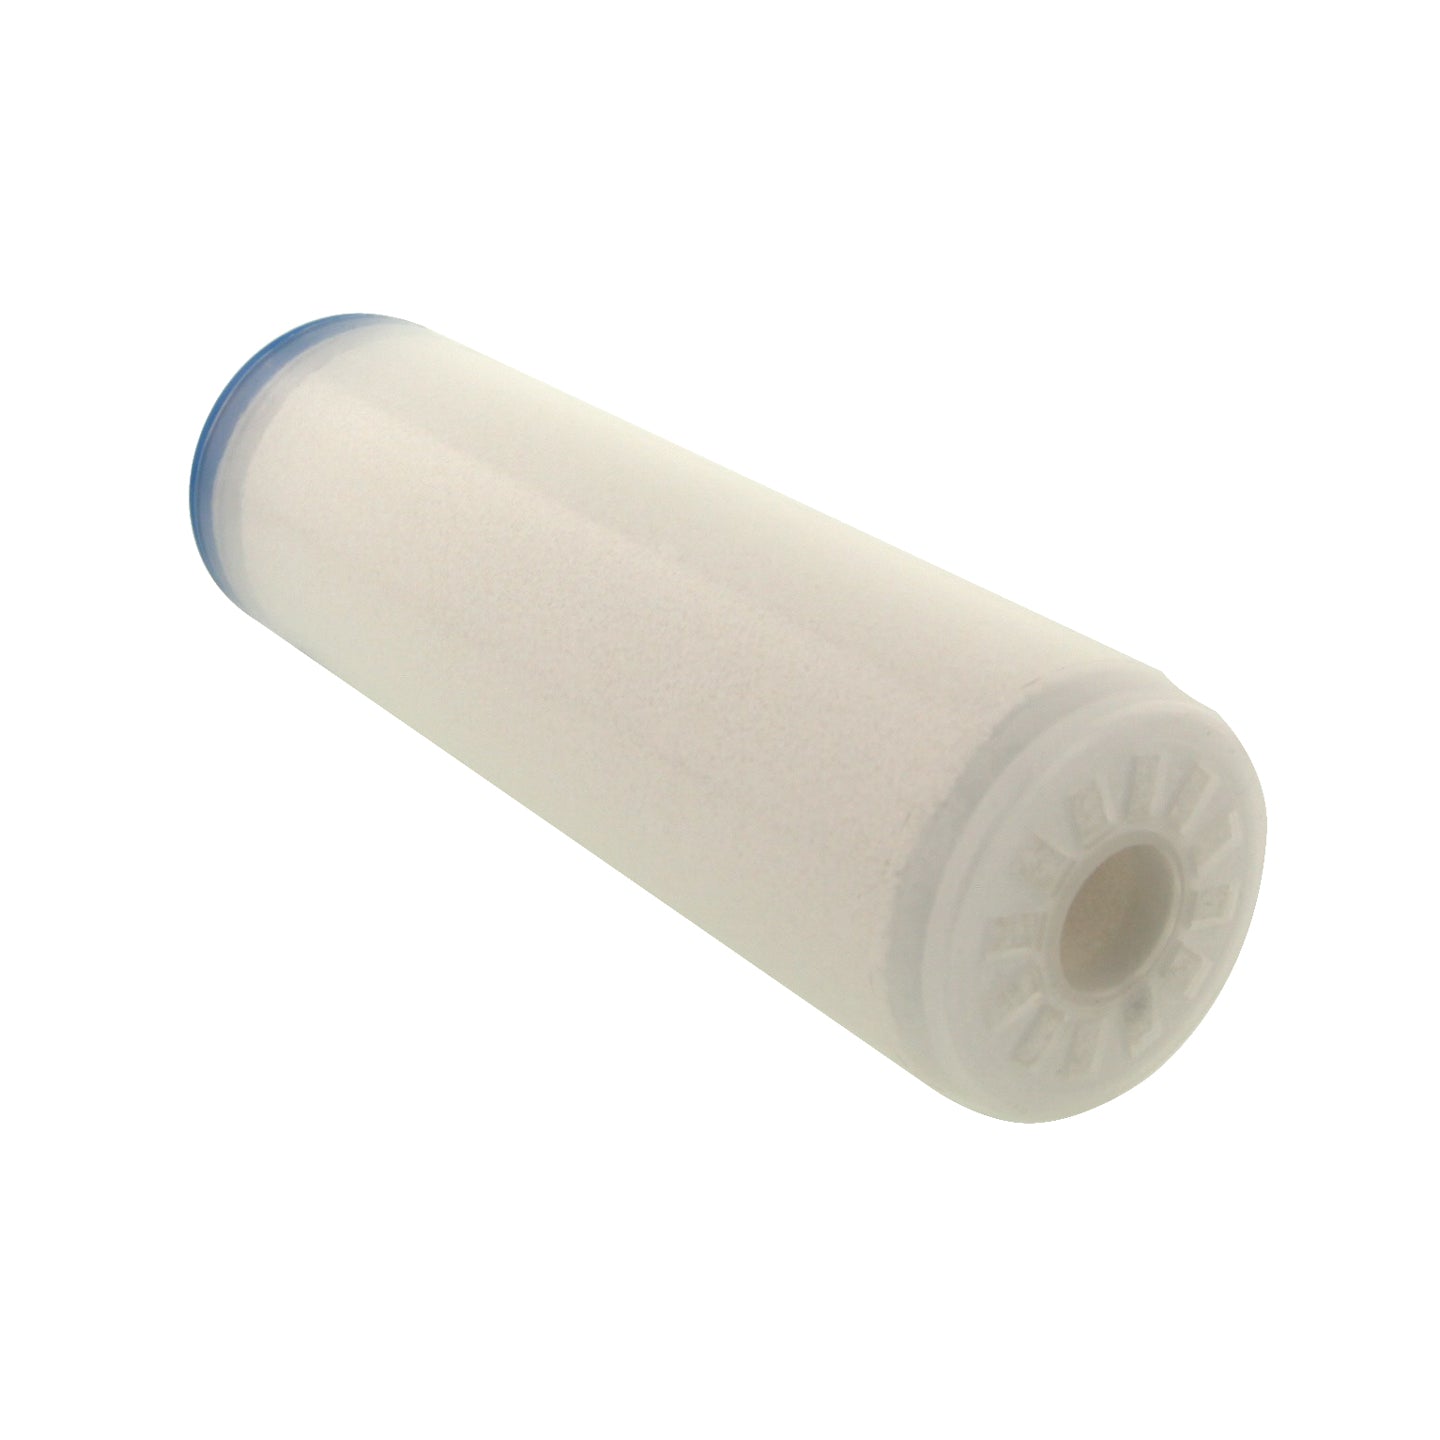 Aries AF Series DOE Fluoride Removal Filter (2.5-inch x 10-inch)